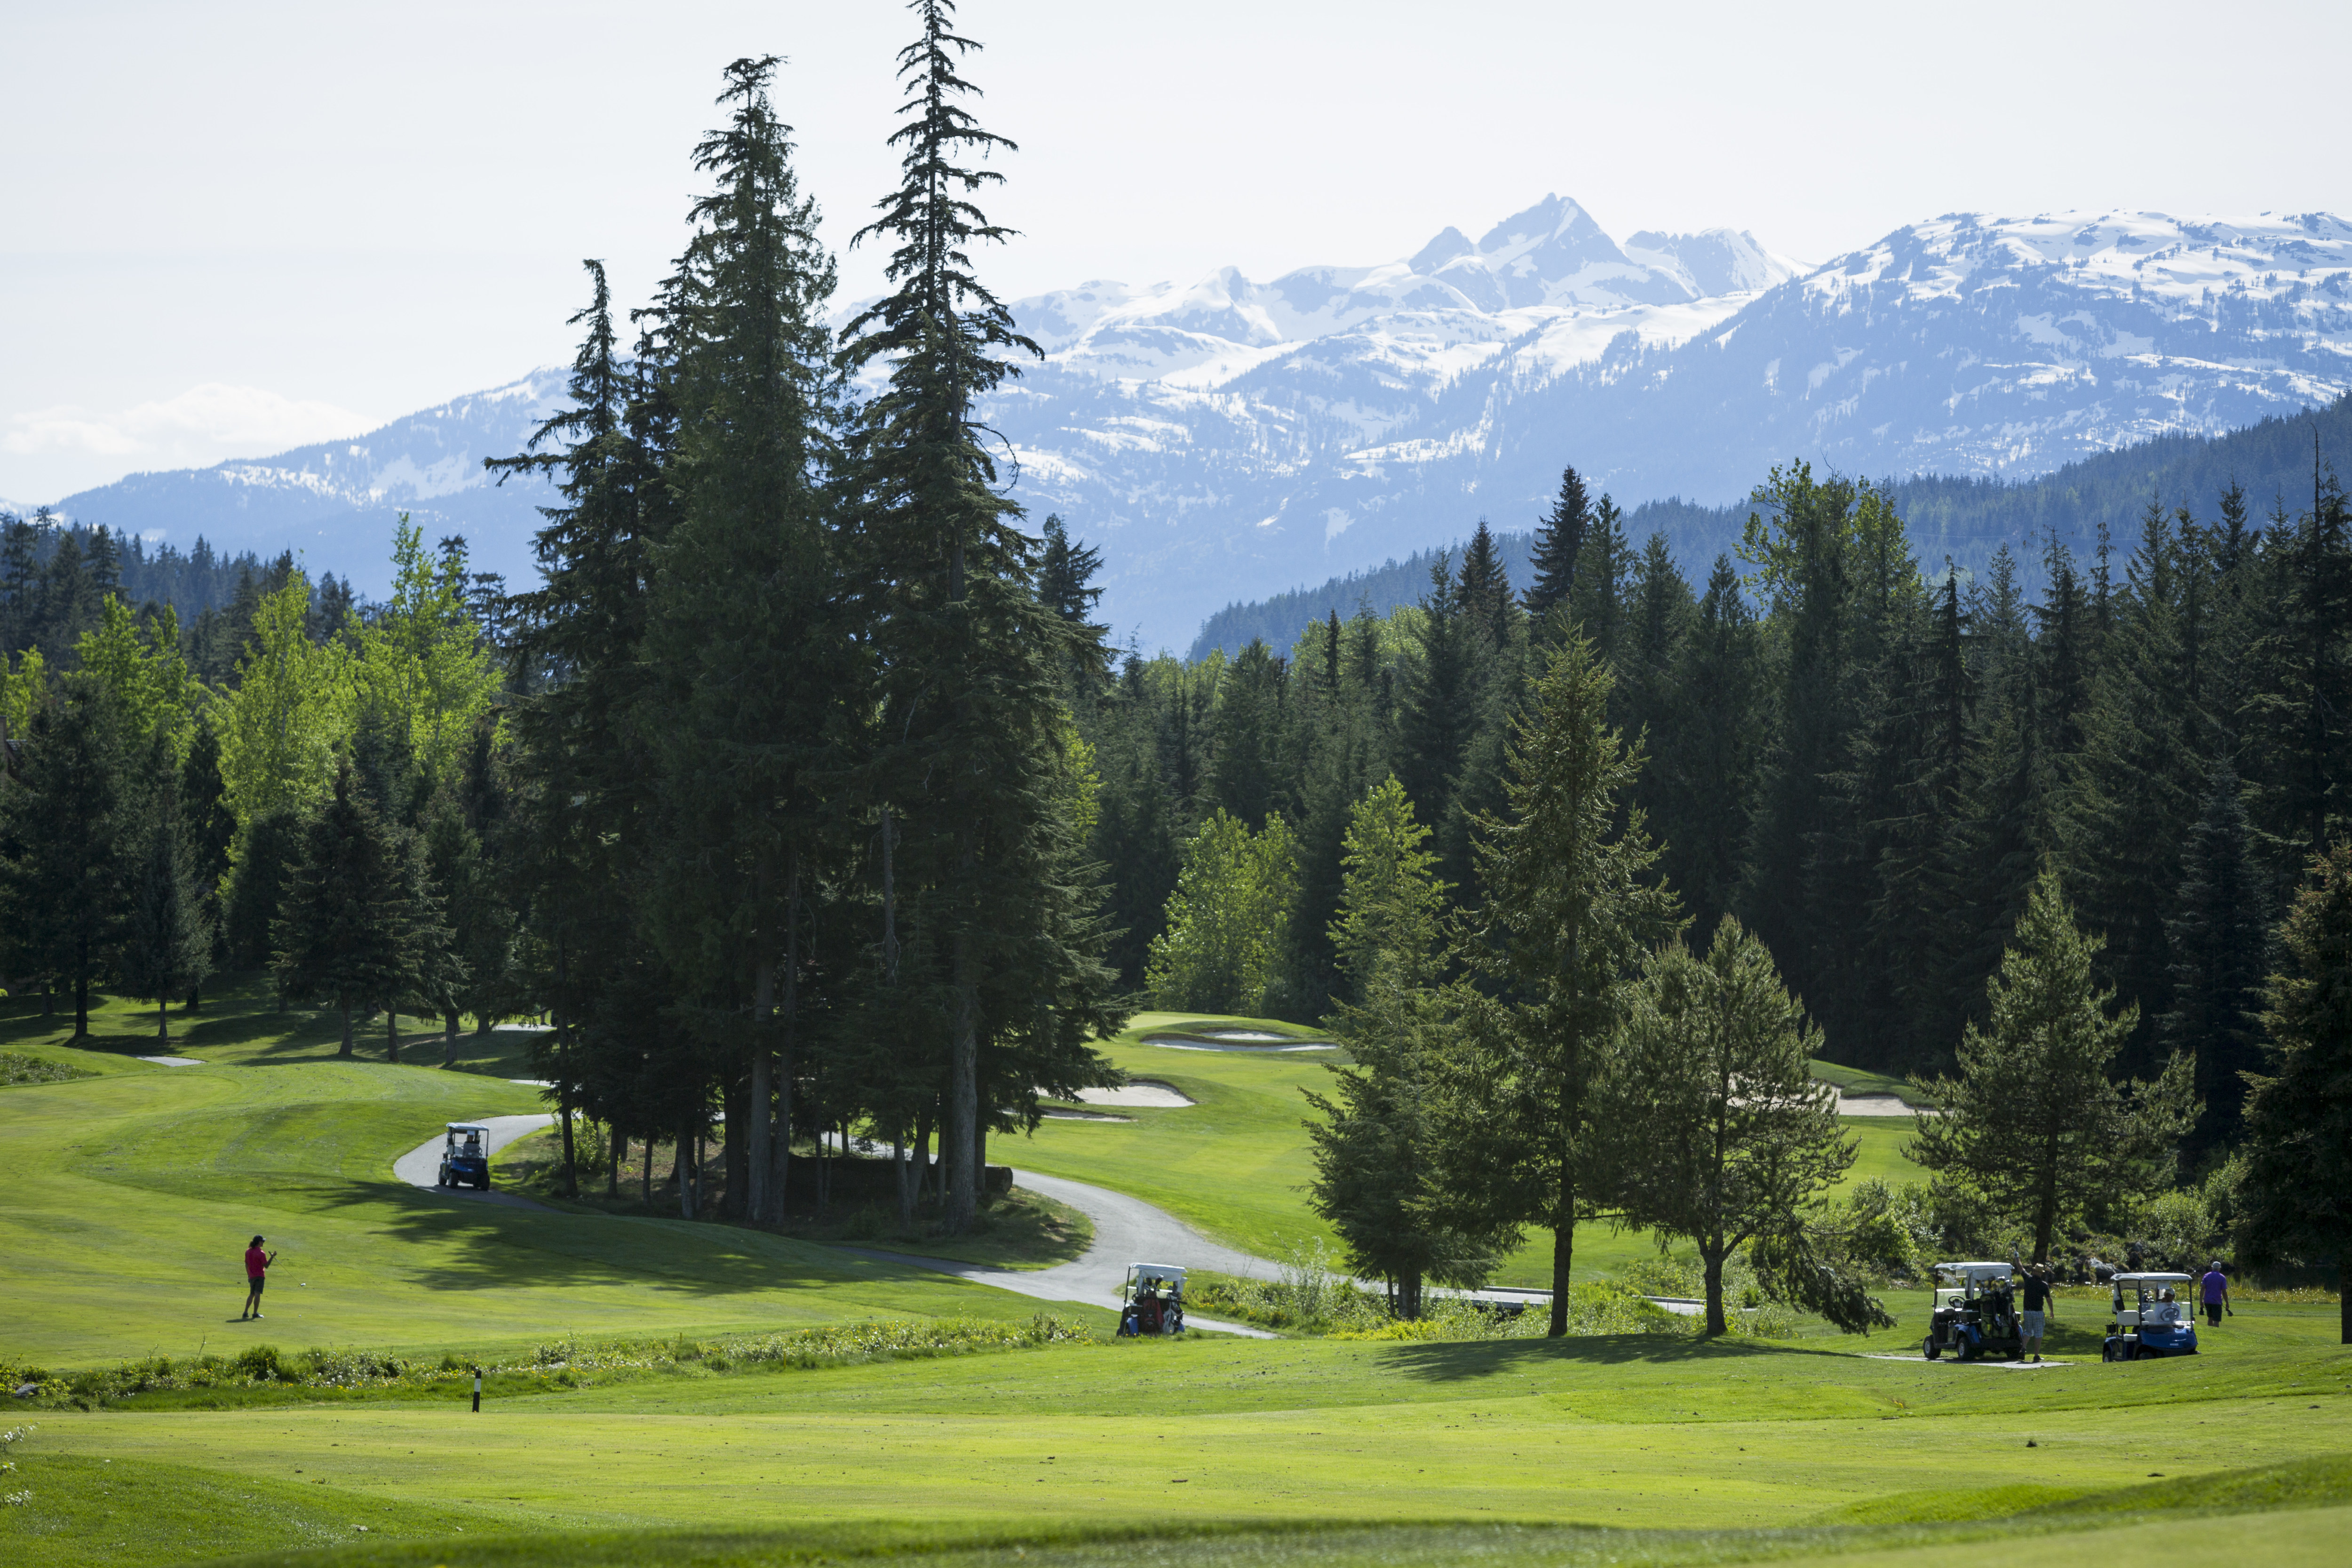 people playing golf amongst the trees and mountains 